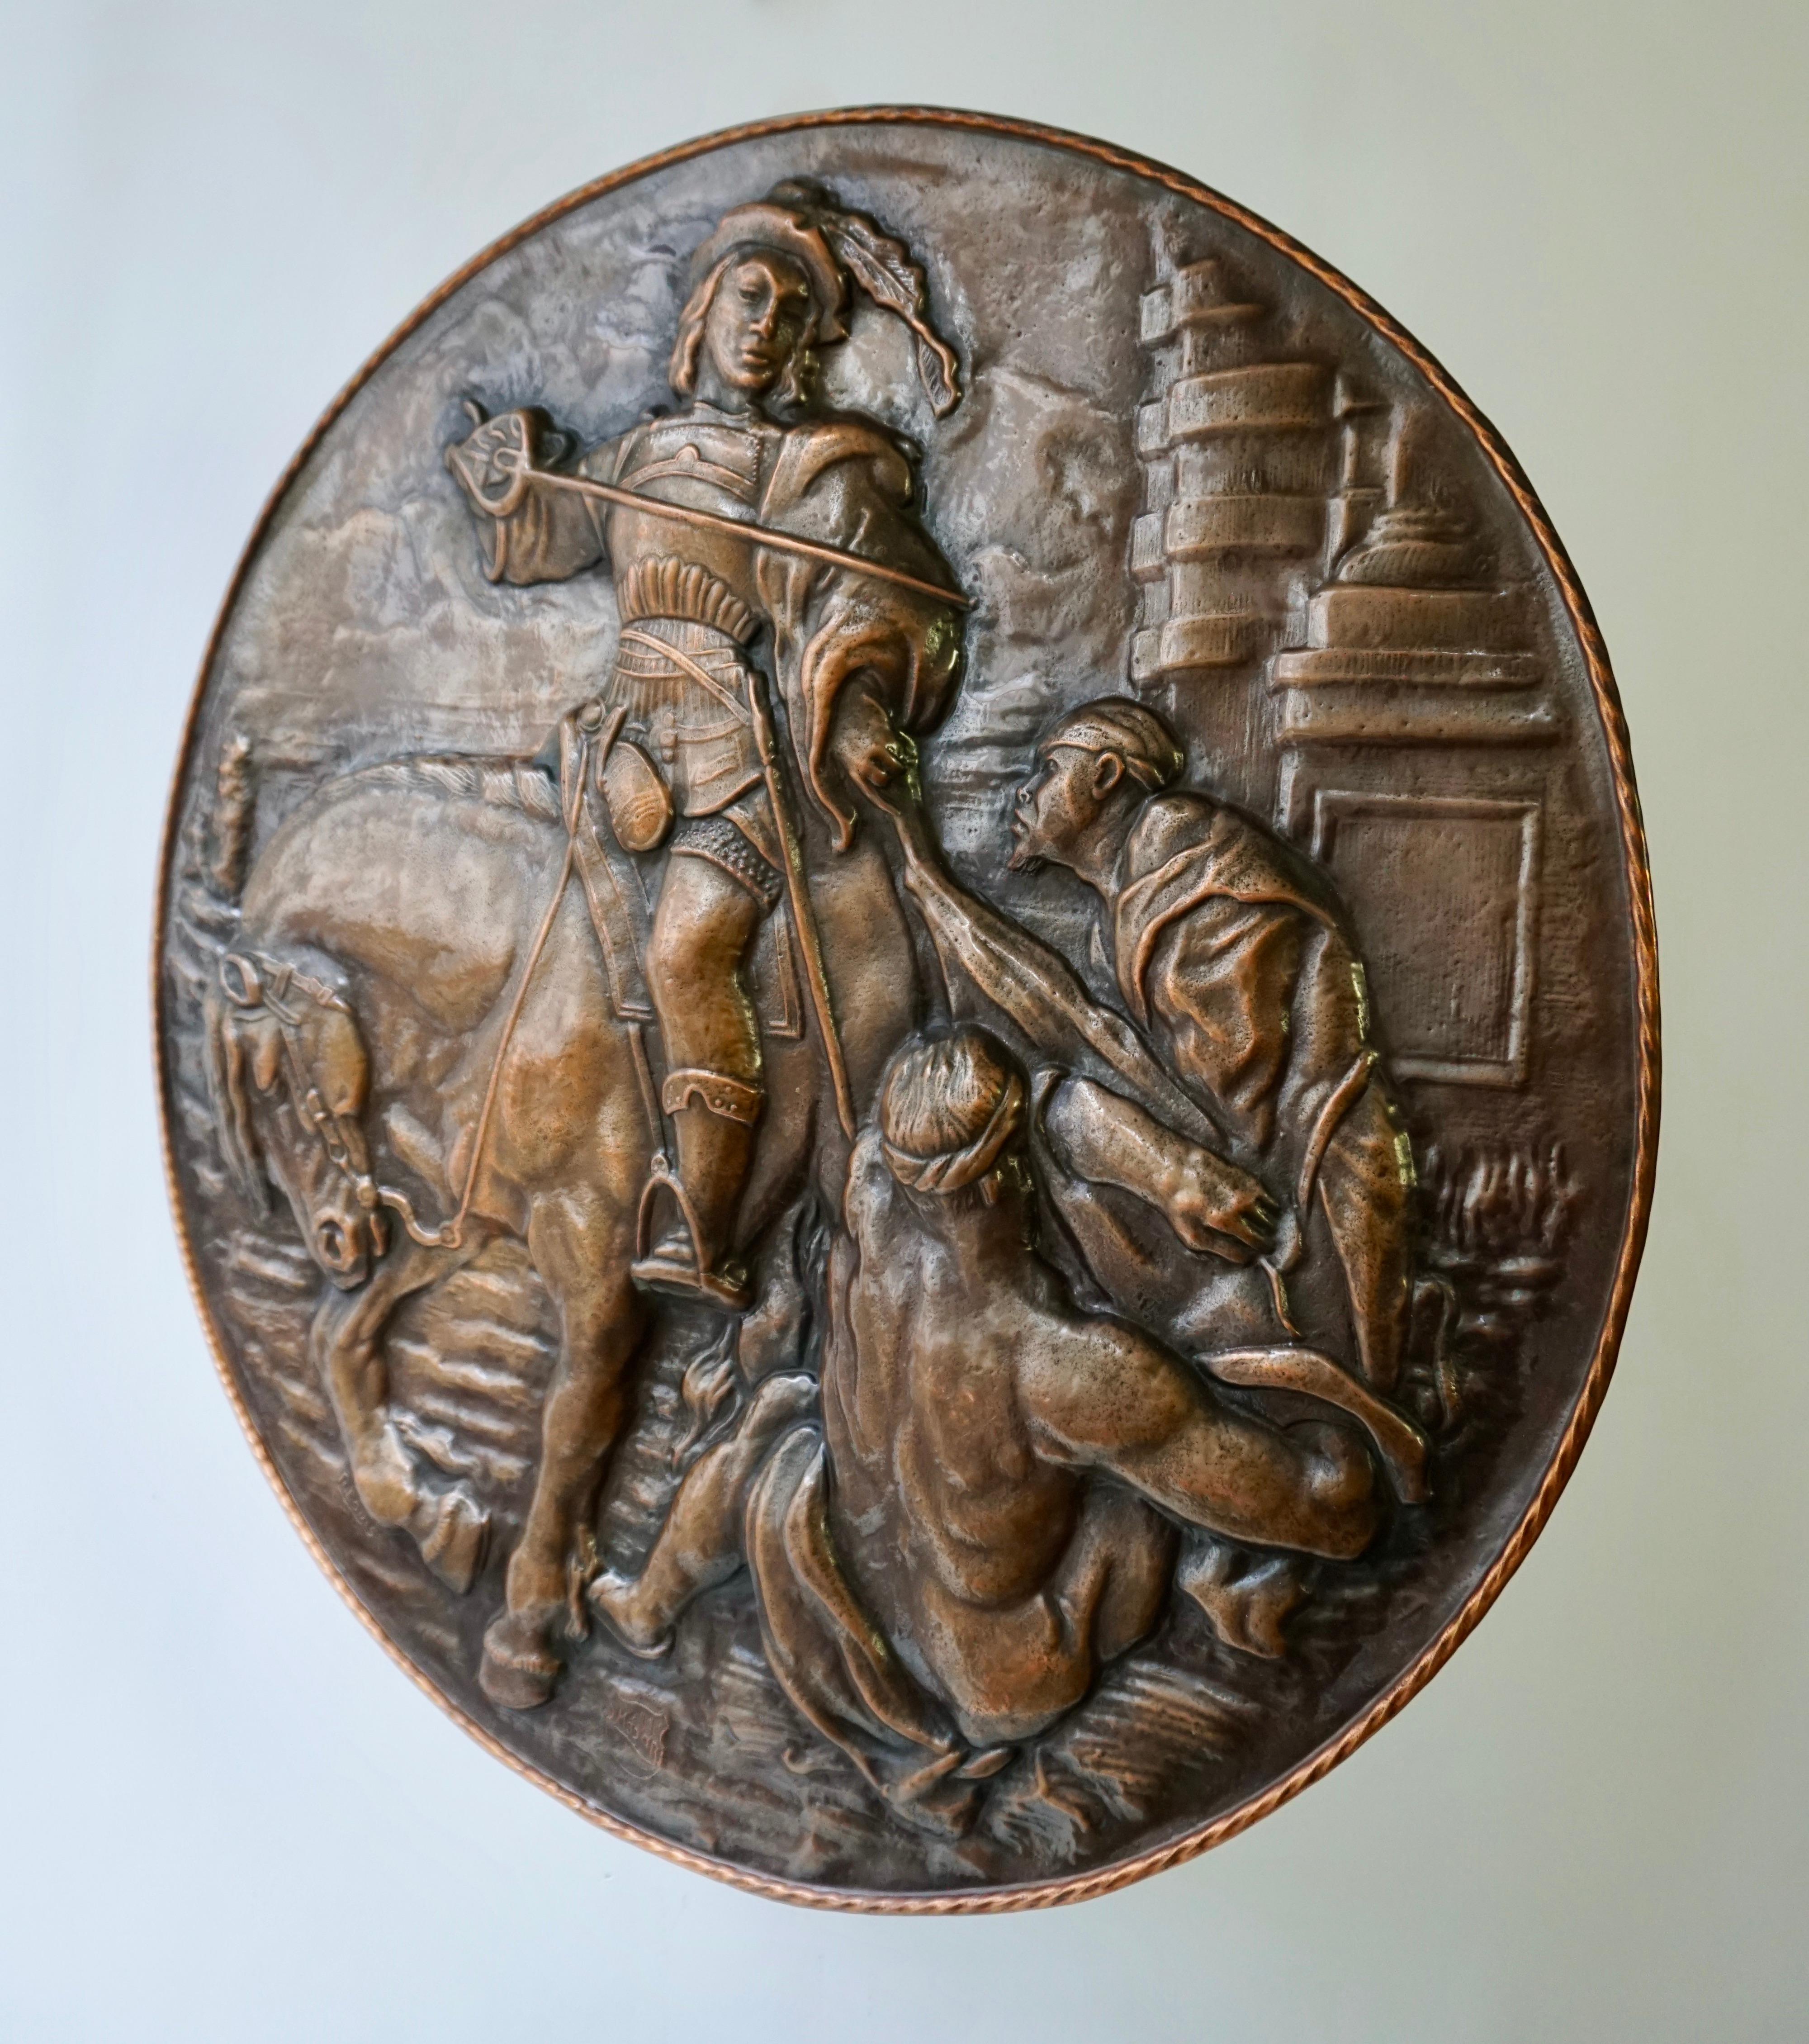 A very large hamered copper wall plate depiction Saint Martin on horse in relief.
Signed A Louis.
Early 20th century. 

Measures: Diameter 75 cm.